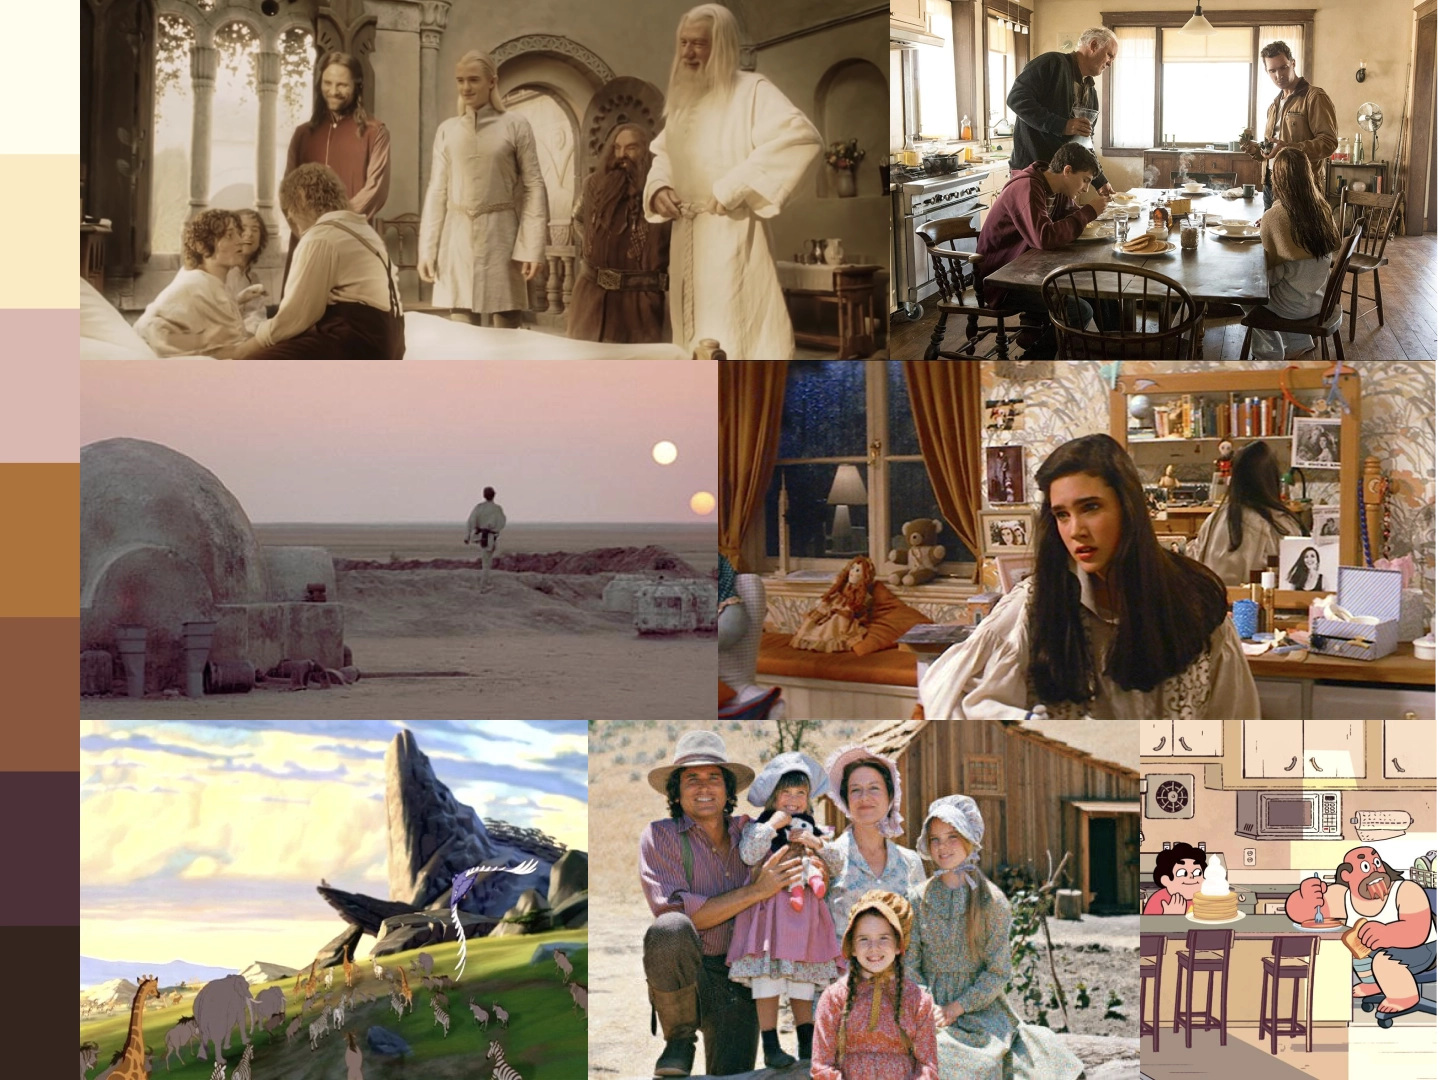 A collage of various "home" settings portrayed in film and TV.